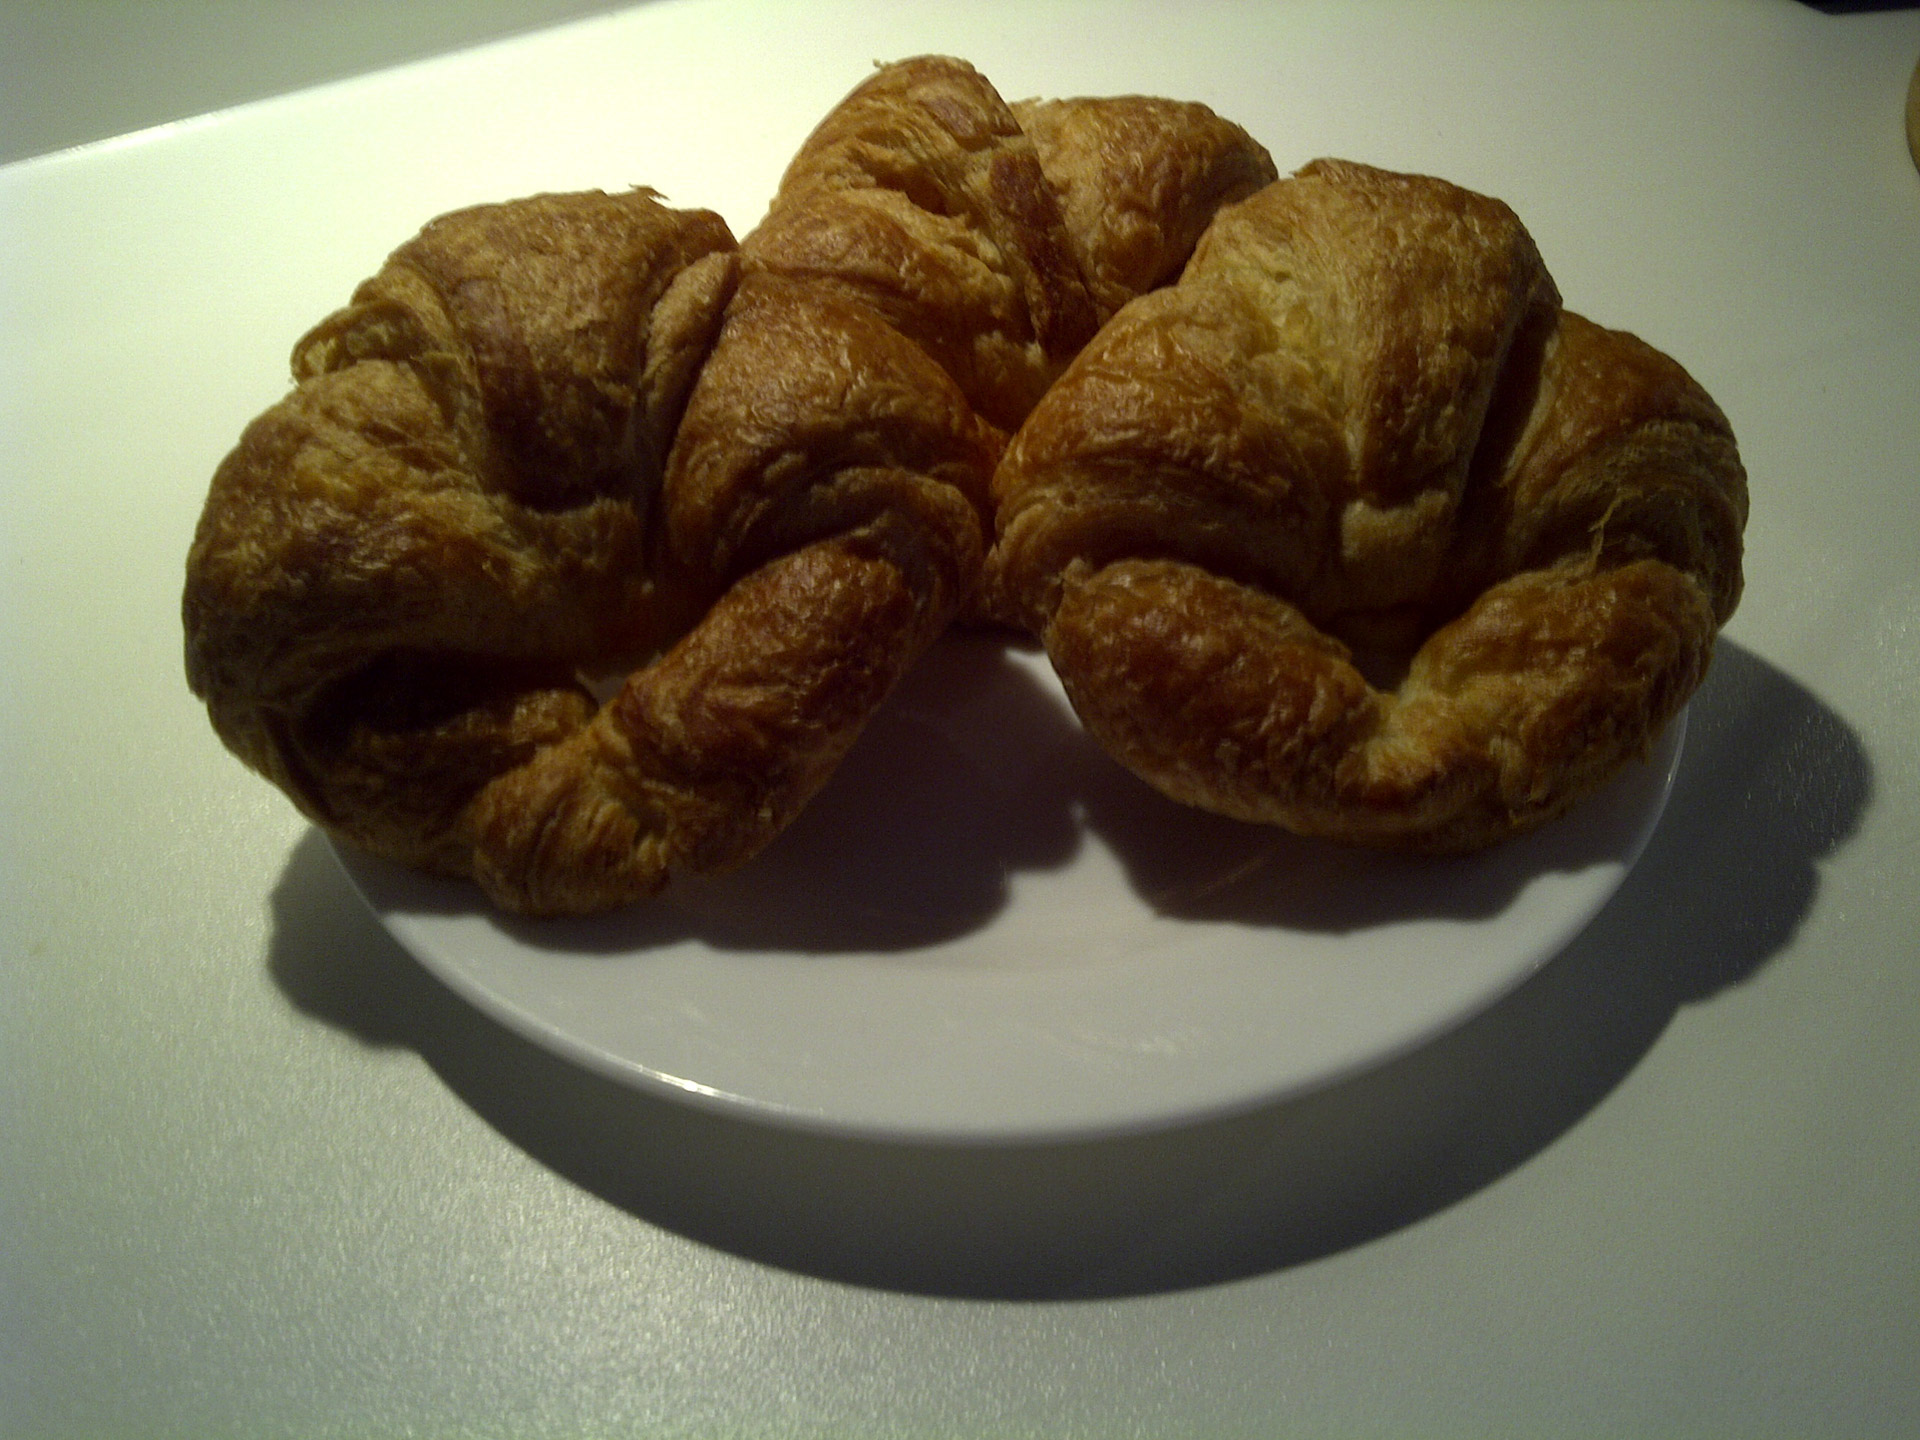 Three Croissants On A White Plate Free Stock Photo - Public Domain Pictures